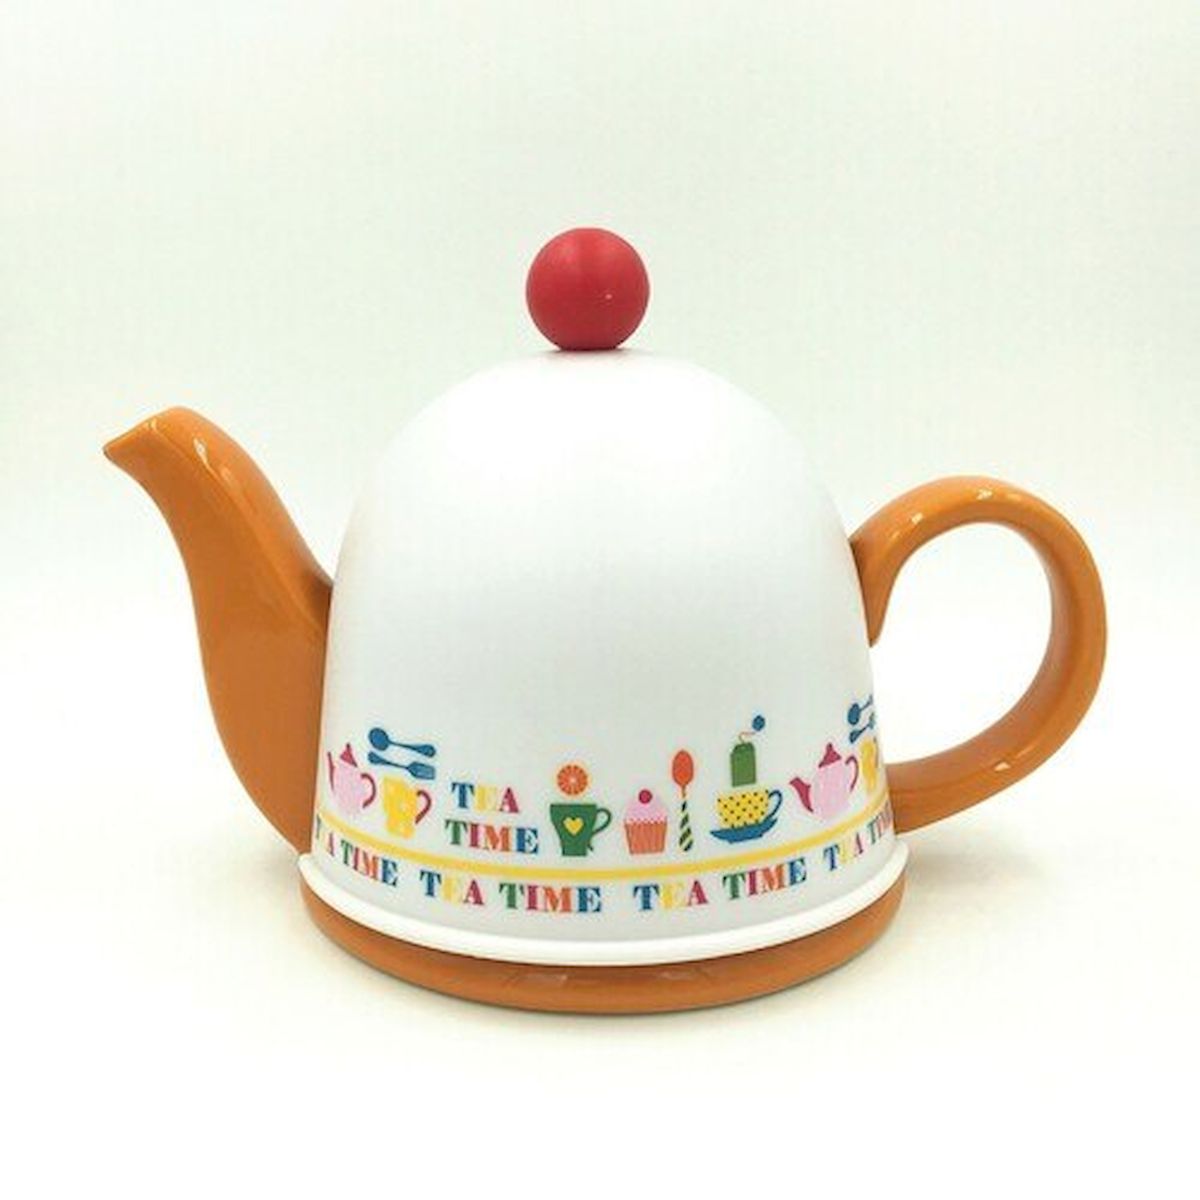 Picture of Mr. MJs HO-SFYT027L-ORANGE Colourful Tea Time Cover & Orange Teapot with Infuser